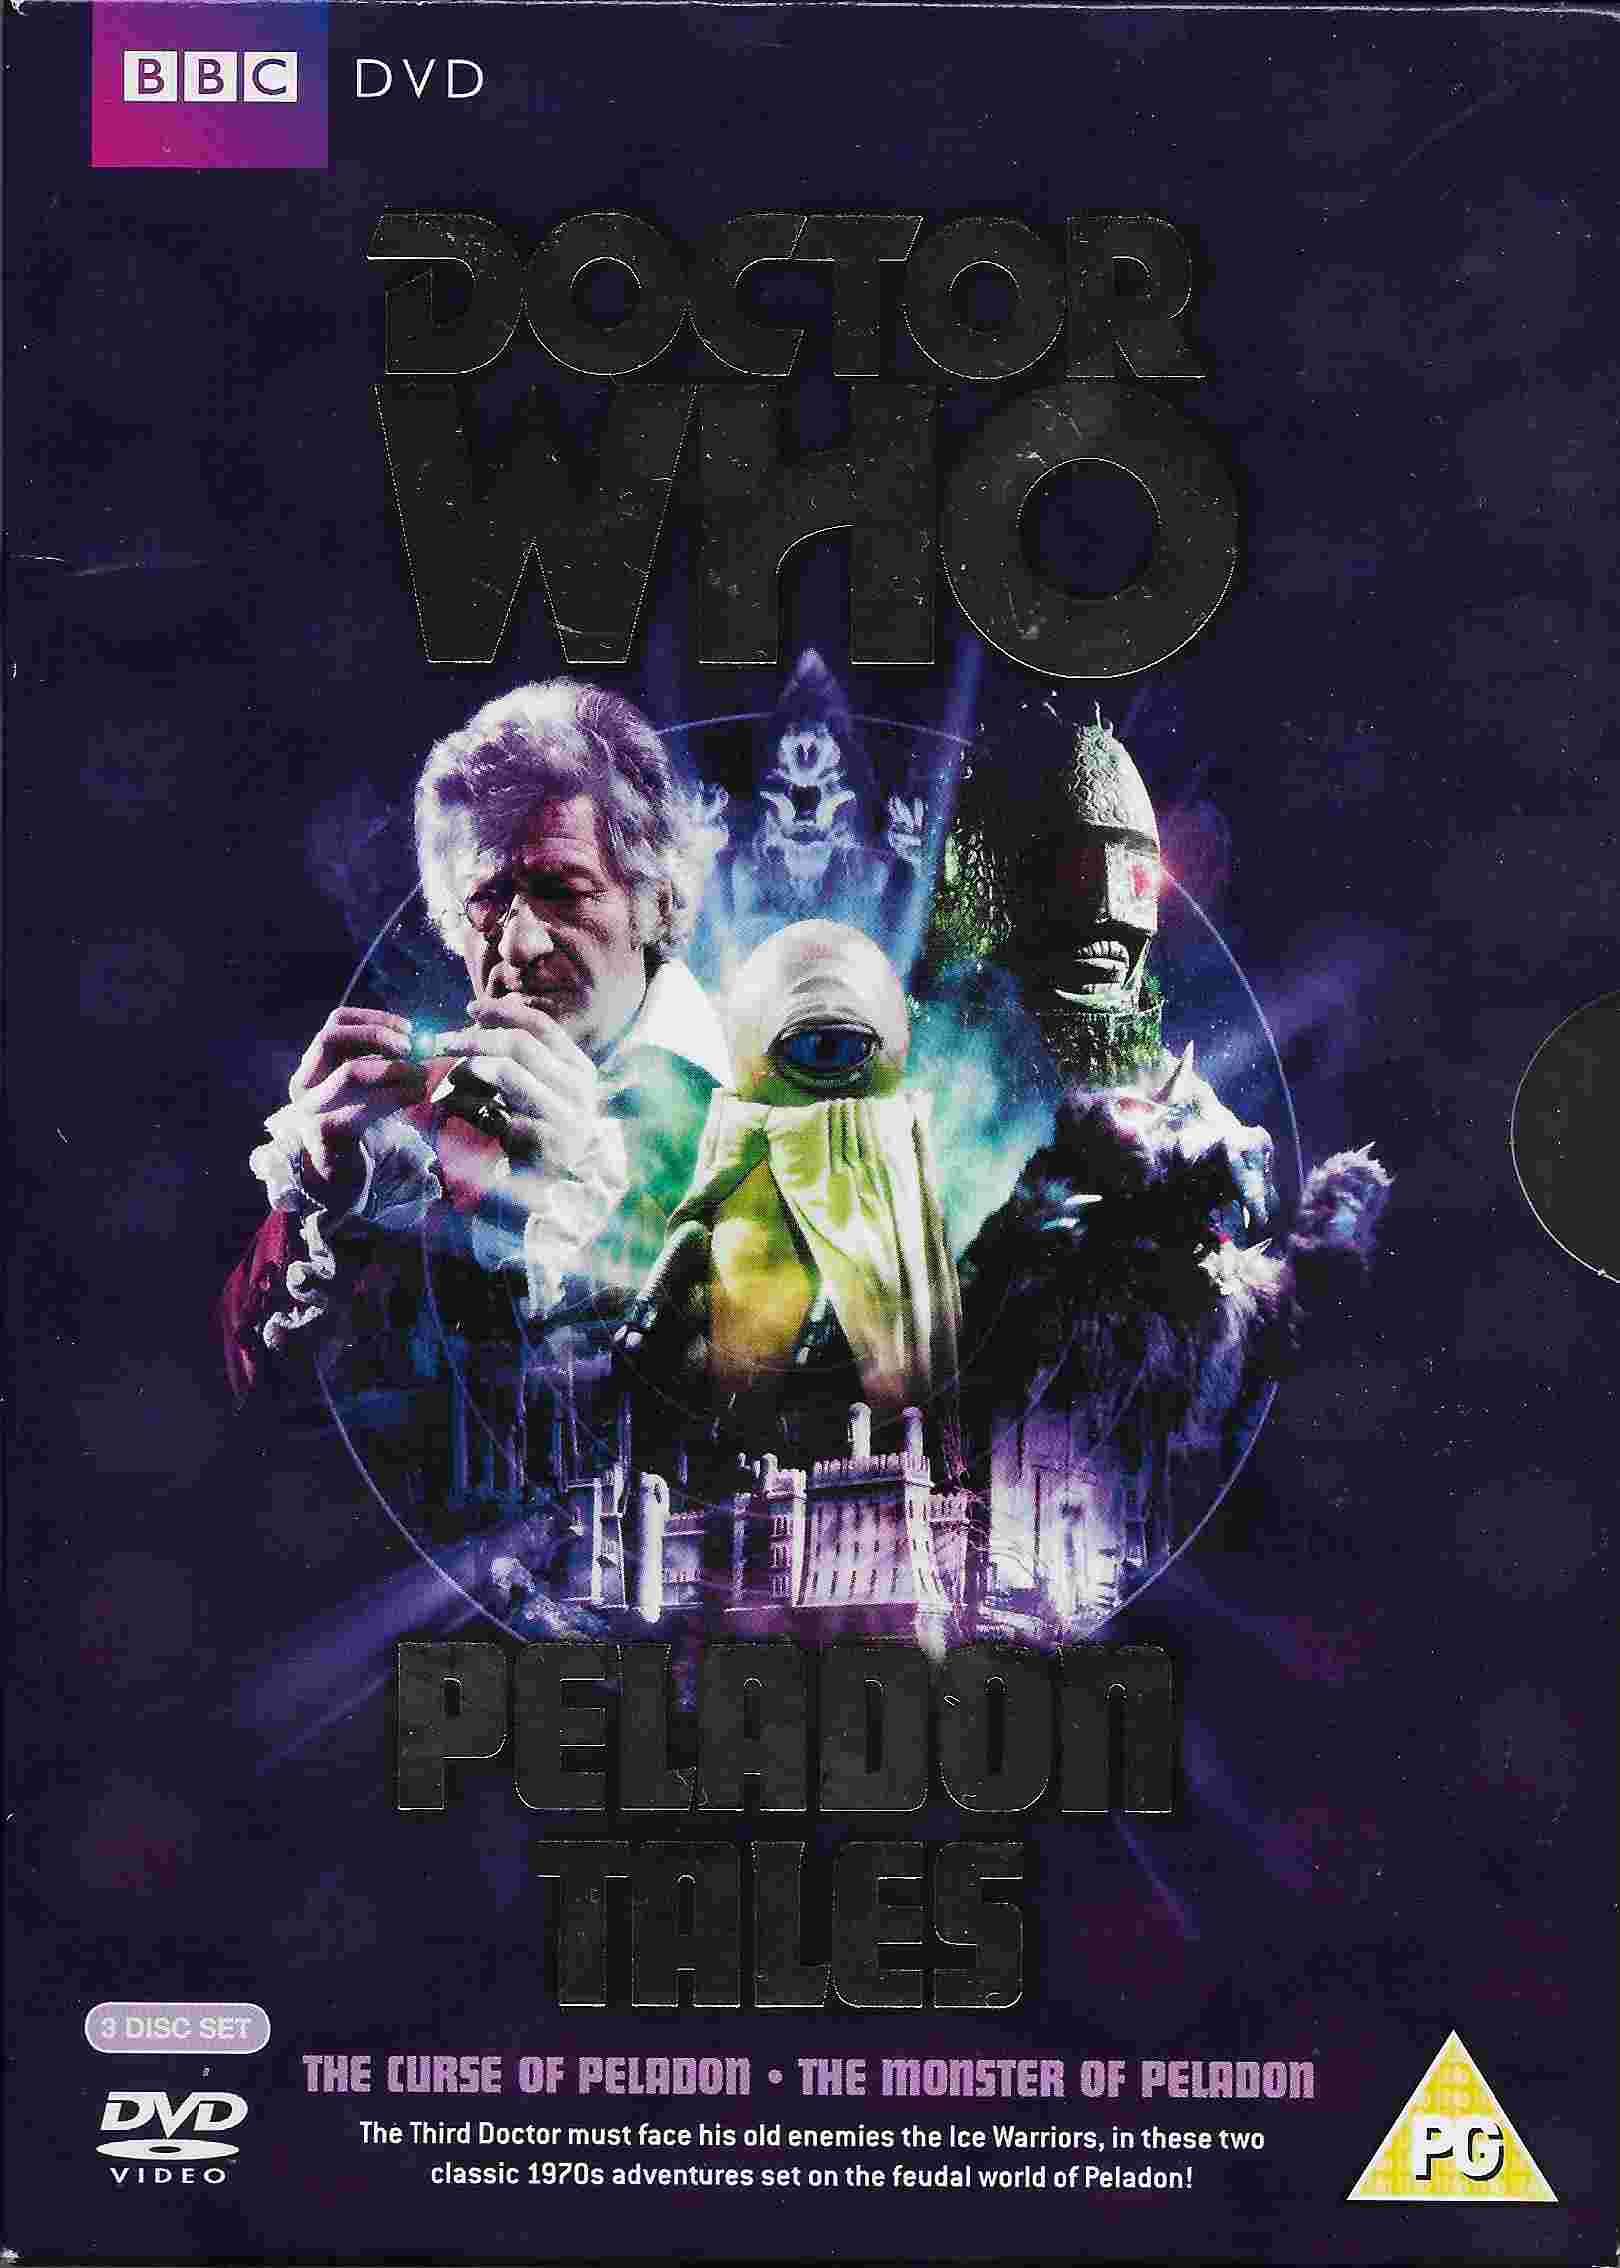 Picture of BBCDVD 2744 Doctor Who - Peladon tales by artist Robert Holmes / Brian Hayles from the BBC records and Tapes library